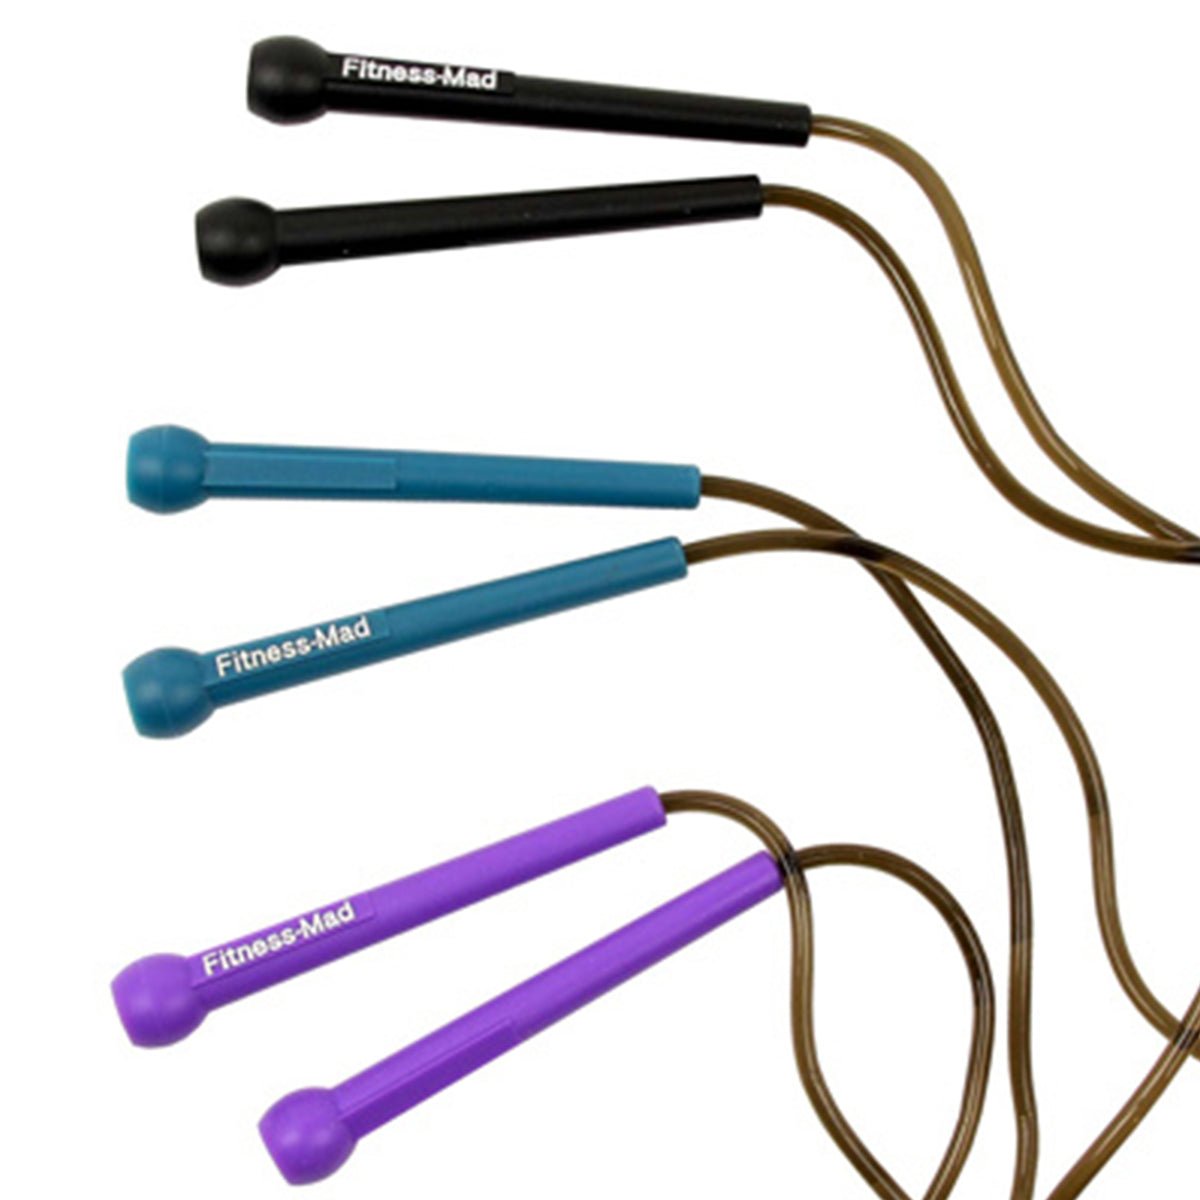 Fitness Mad  Pro Speed Rope